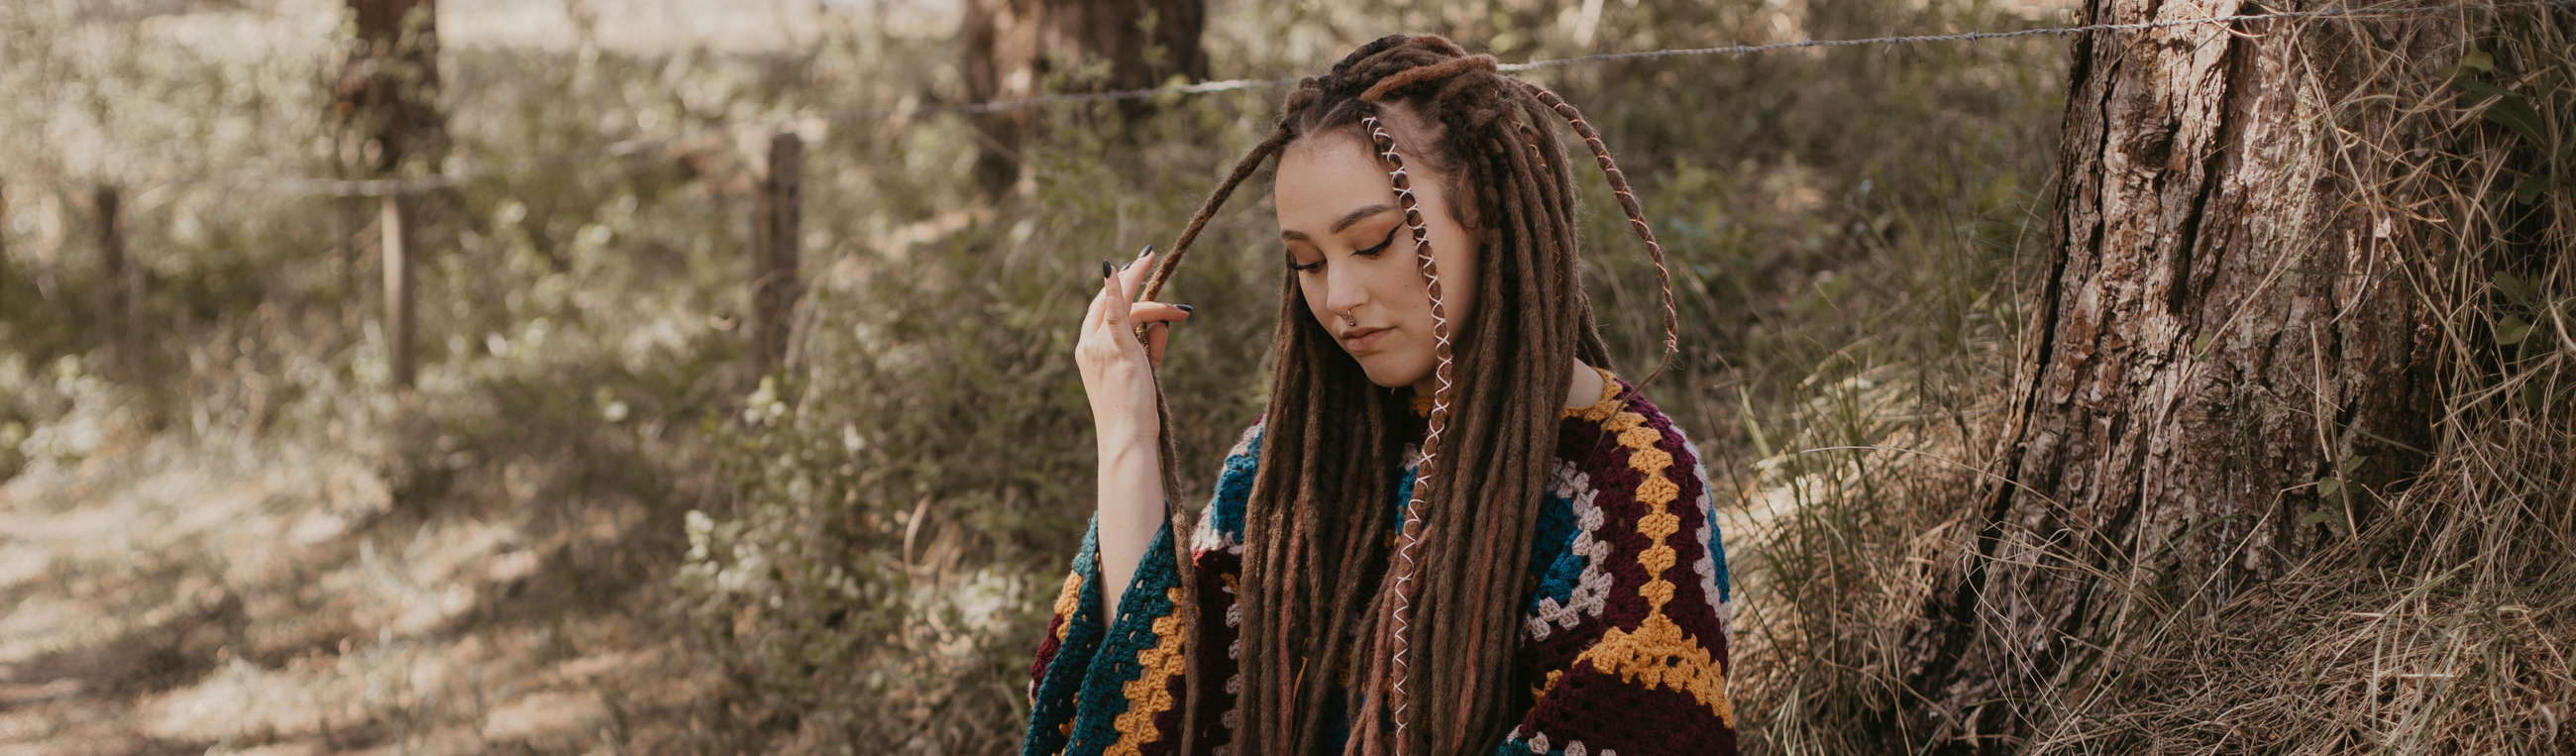 Romy with her hazelnut dream dreadset, Shop the look for this full head dreadset